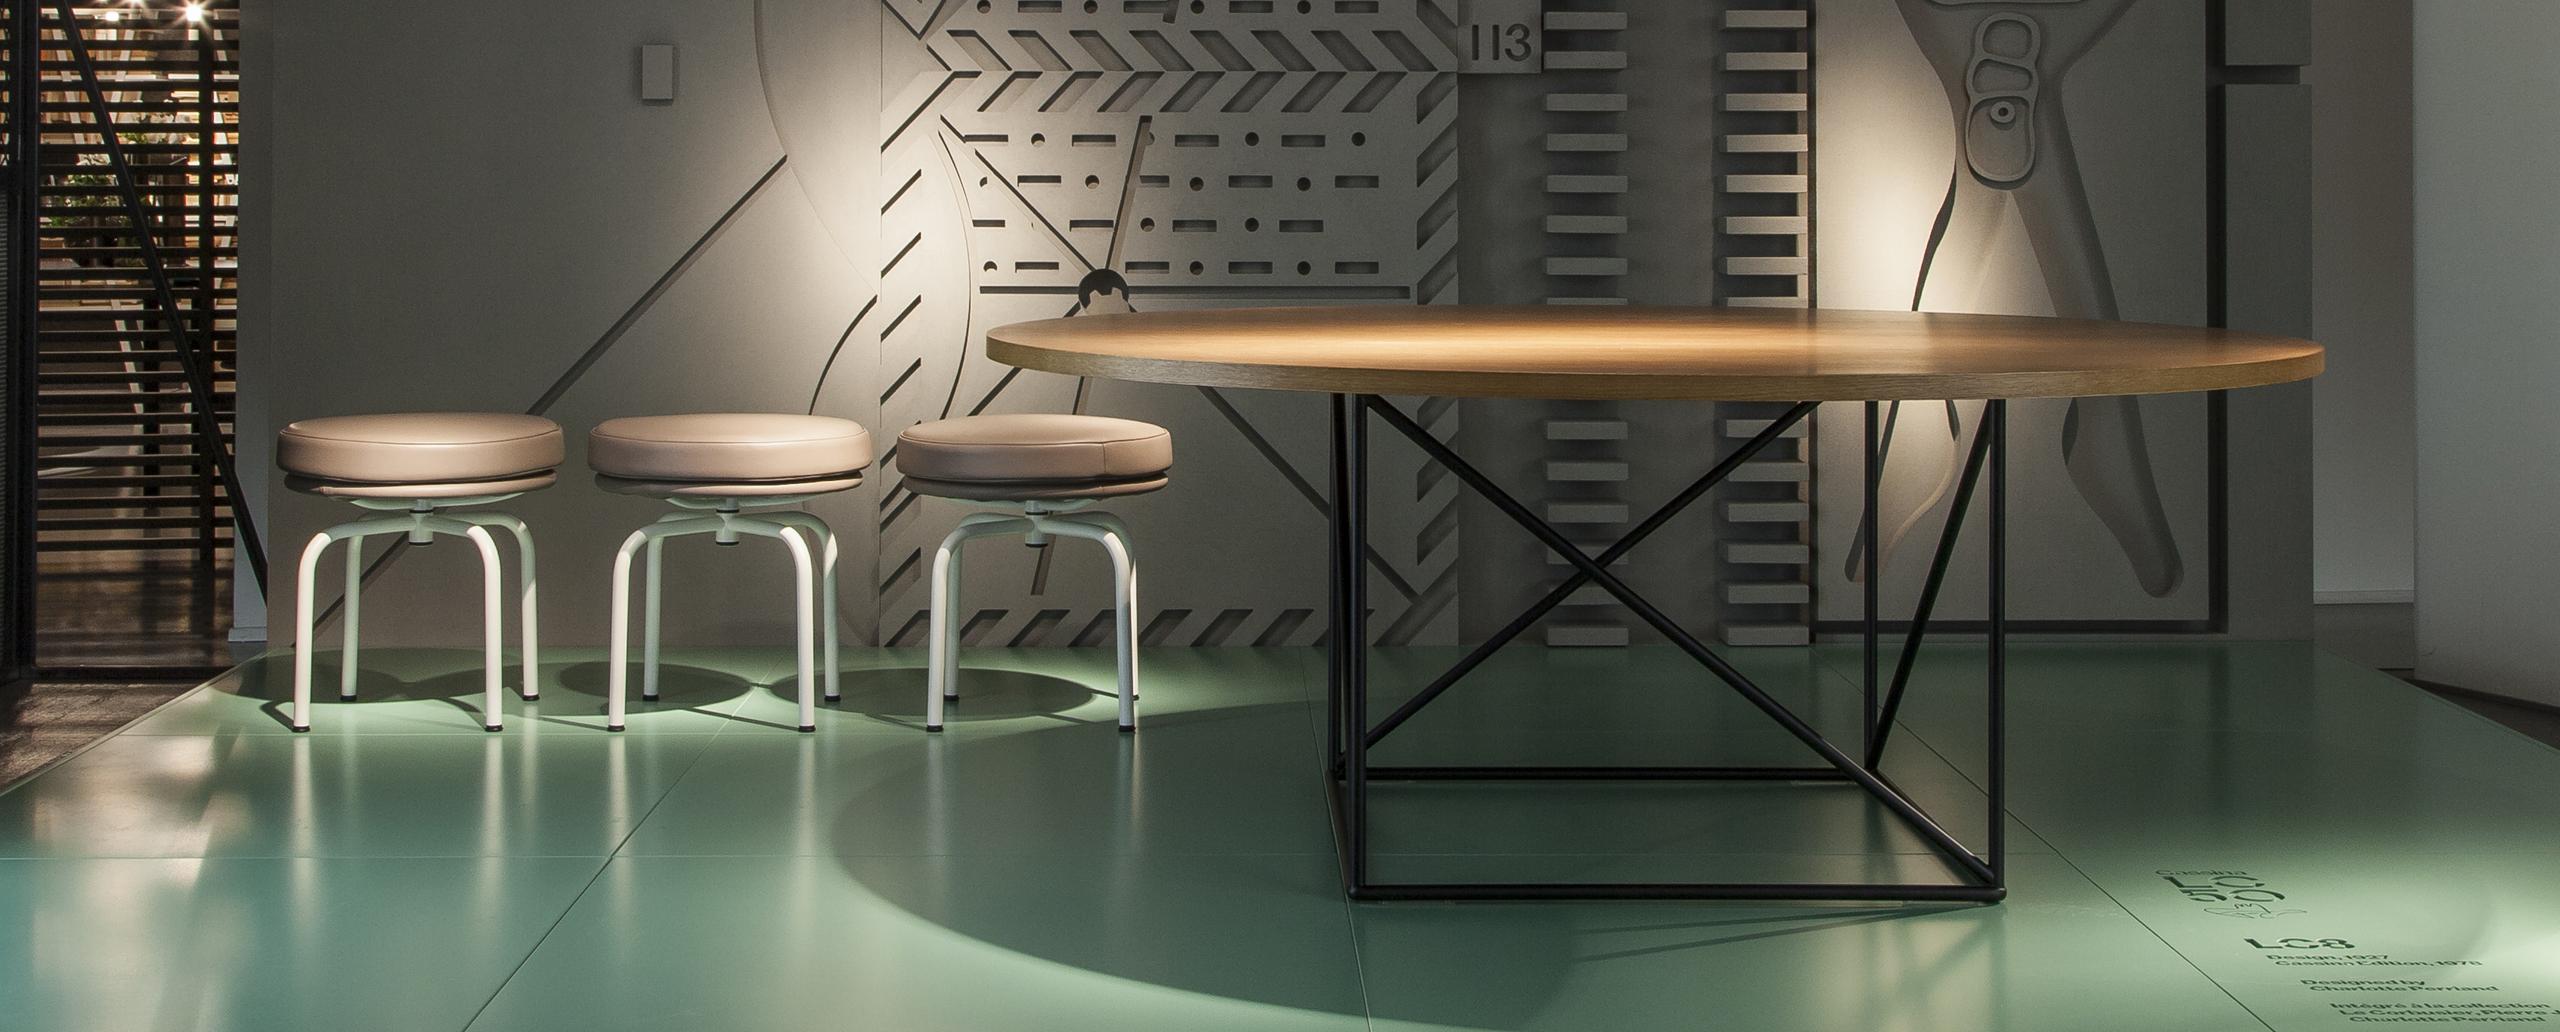 Table designed by Le Corbusier in 1958. Relaunched in 2010.
Manufactured by Cassina in Italy.

Organic and yet rational, this table was designed by Le Corbusier in 1958. Its distinctive construction derives from two geometric figures: the circle, in